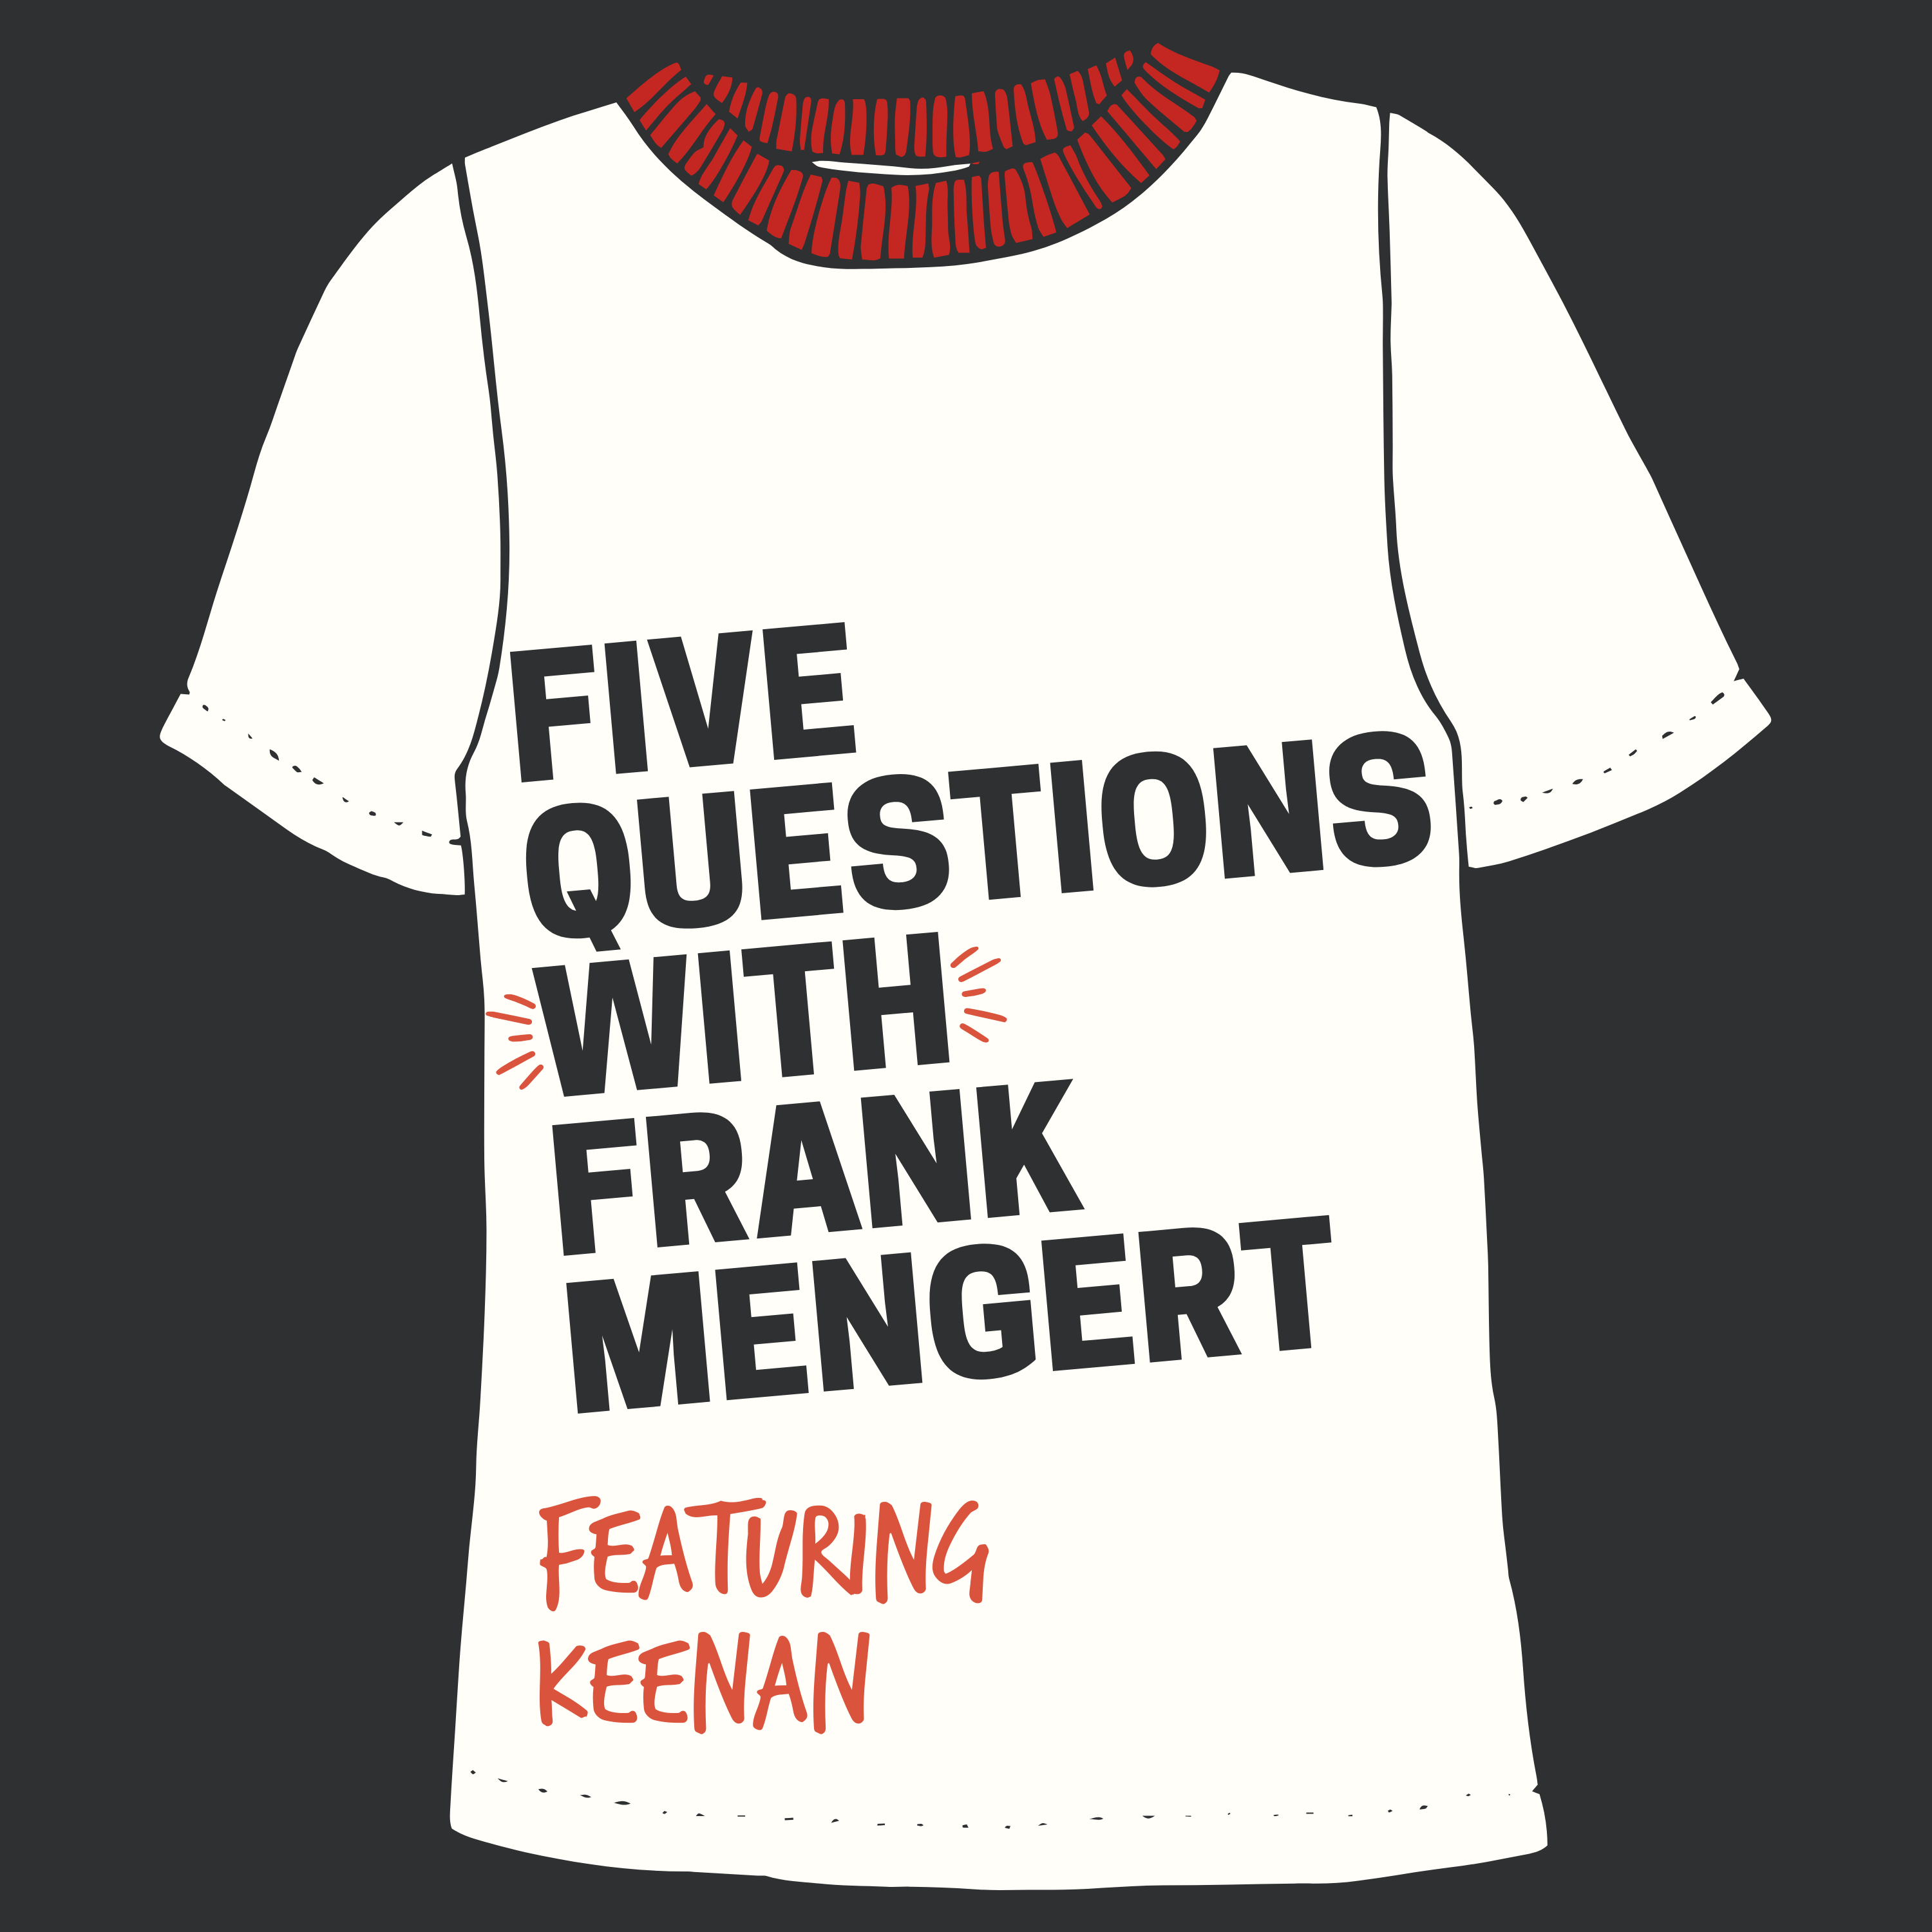 Artwork for podcast 5 Questions with Frank Mengert